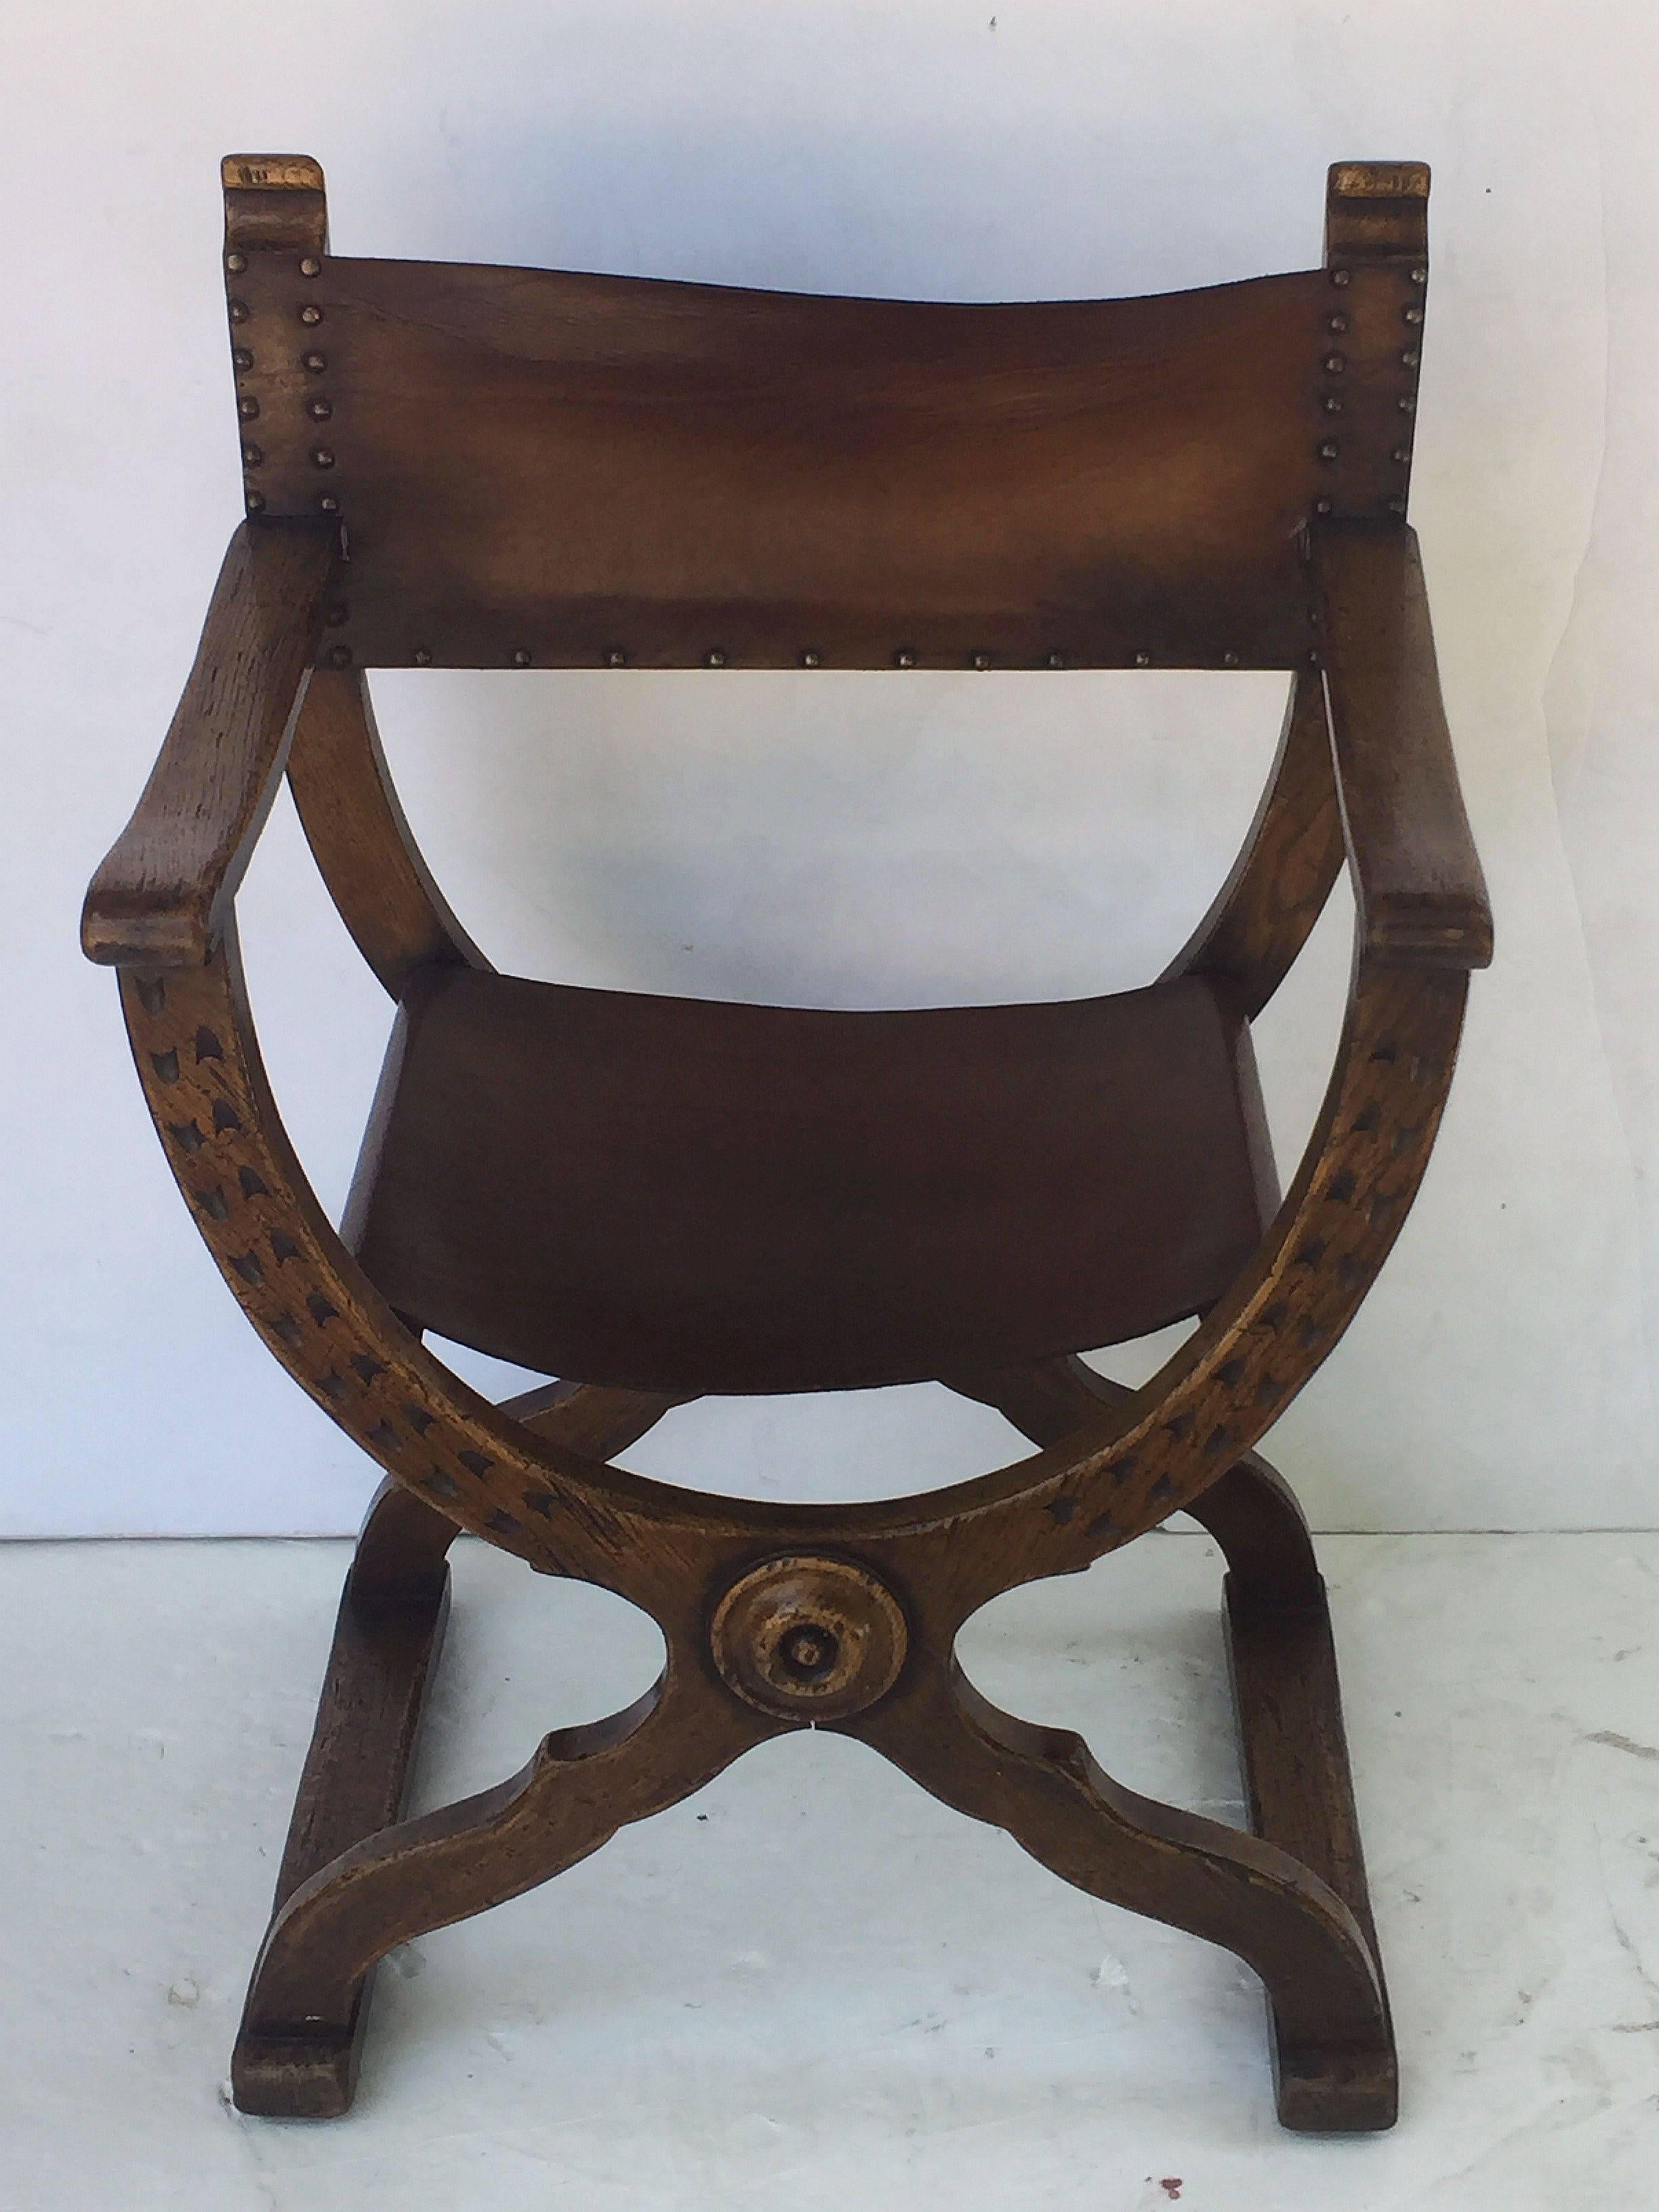 A comfortable Continental armchair (or lounge chair) in the X-shaped Roman style known as a Savonarola, featuring a finely patinated wooden body with aged leather back and sides and nail-head accents.